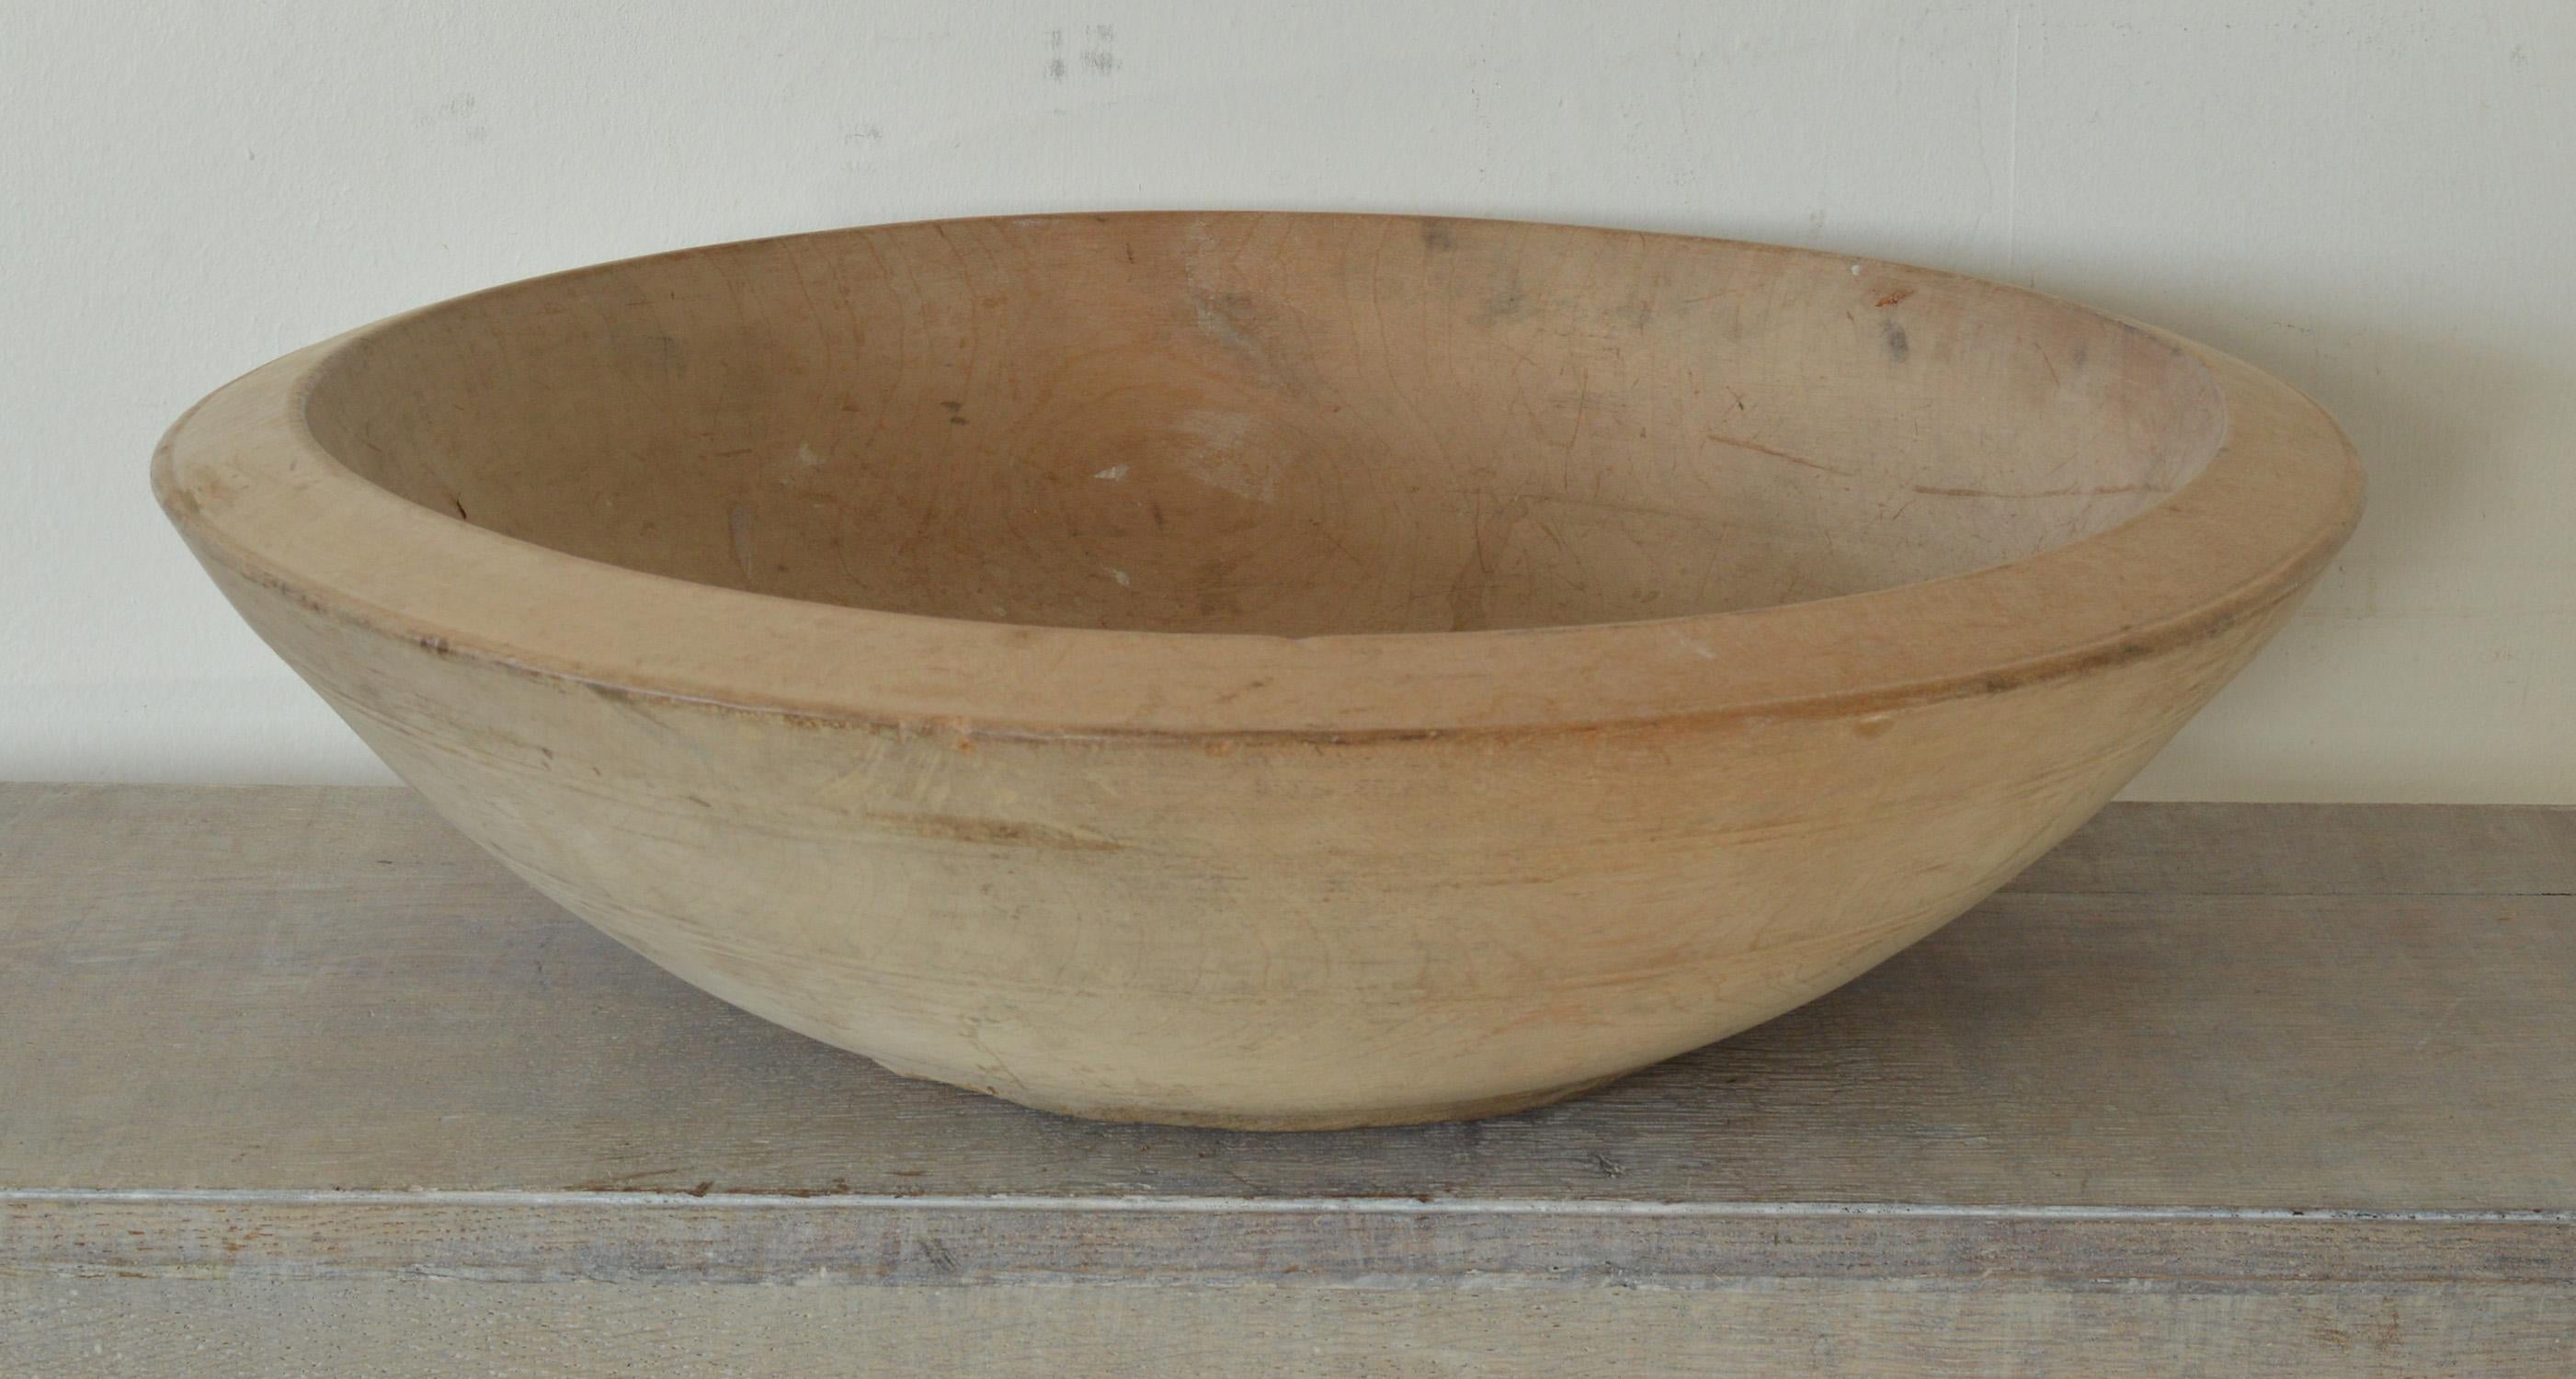 Shaker Large Antique Sycamore Dairy Bowl, English, 18th Century